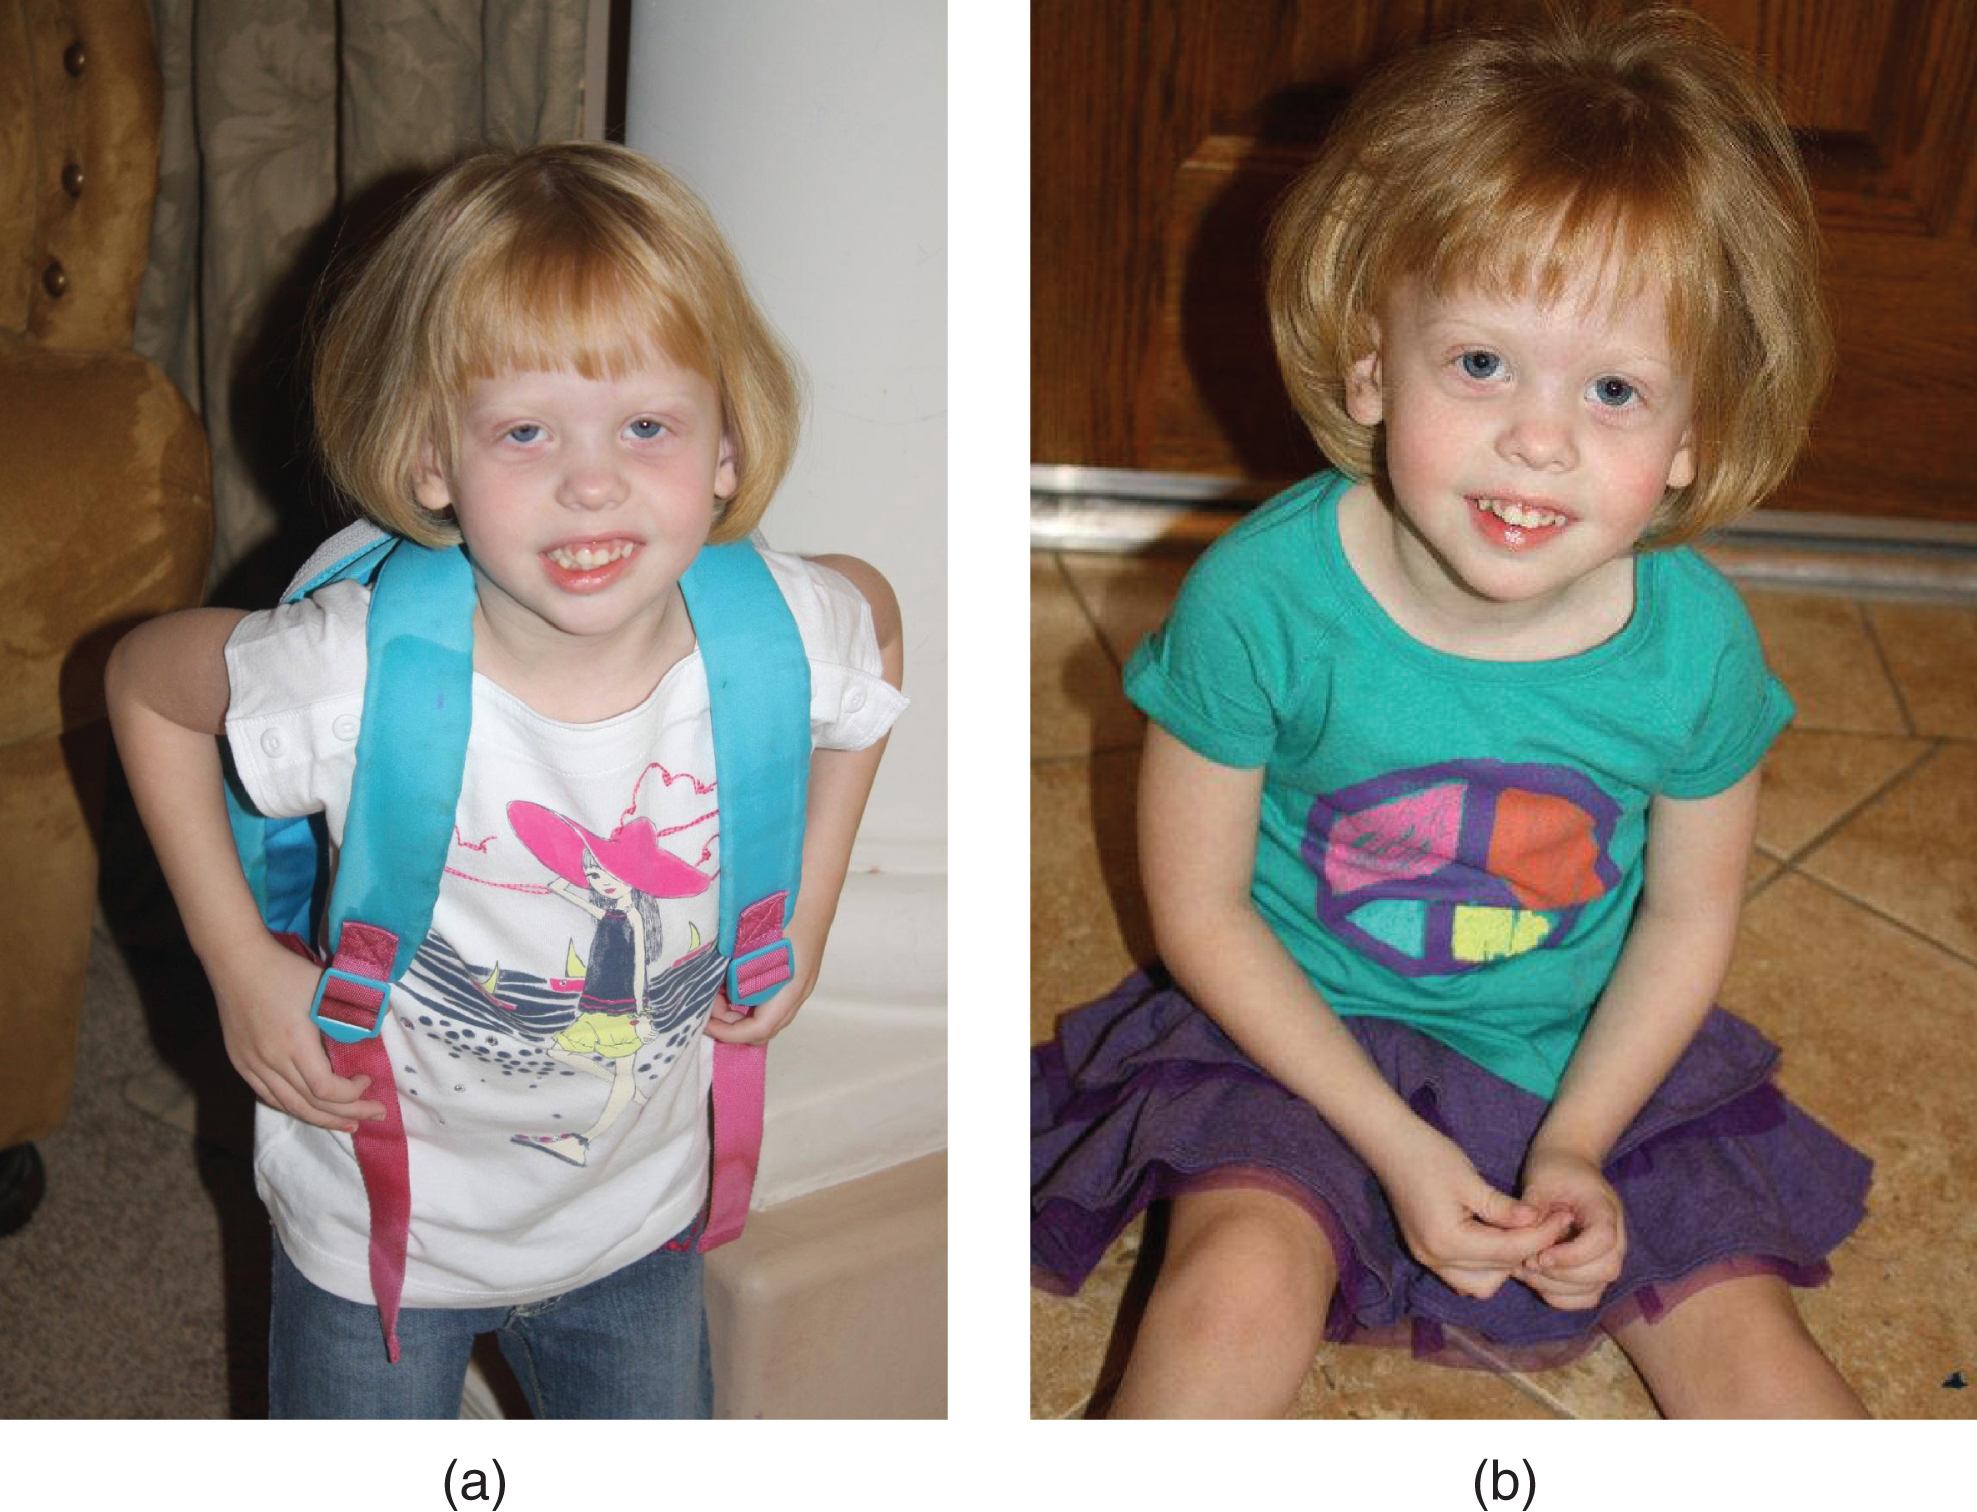 a, b. 2-year-old girl with “mild” RSH/SLO syndrome diagnosed clinically (2/3 toe syndactyly!) at 17 months; confirmed biochemically by Dr. R.I. Kelley (7DHC: 86 mcg/nL, cholesterol: 102 mg/dL. Being followed by Dr. F.D. Porter at the NIH and Dr. R.D. Steiner at OHSU/Portland. The latter has determined 2 different mutations in the DHCR7 gene (R450L and N407K). She was born normally but developed reflux, failure to thrive, sleep disturbance, mild developmental and growth delay. Cholesterol treatment appeared to lead to a deterioration of behavior; Simvastatin treatment (Jira et al., 2000) did not appear to affect development. Now toilet-trained and in 3rd grade (special education).